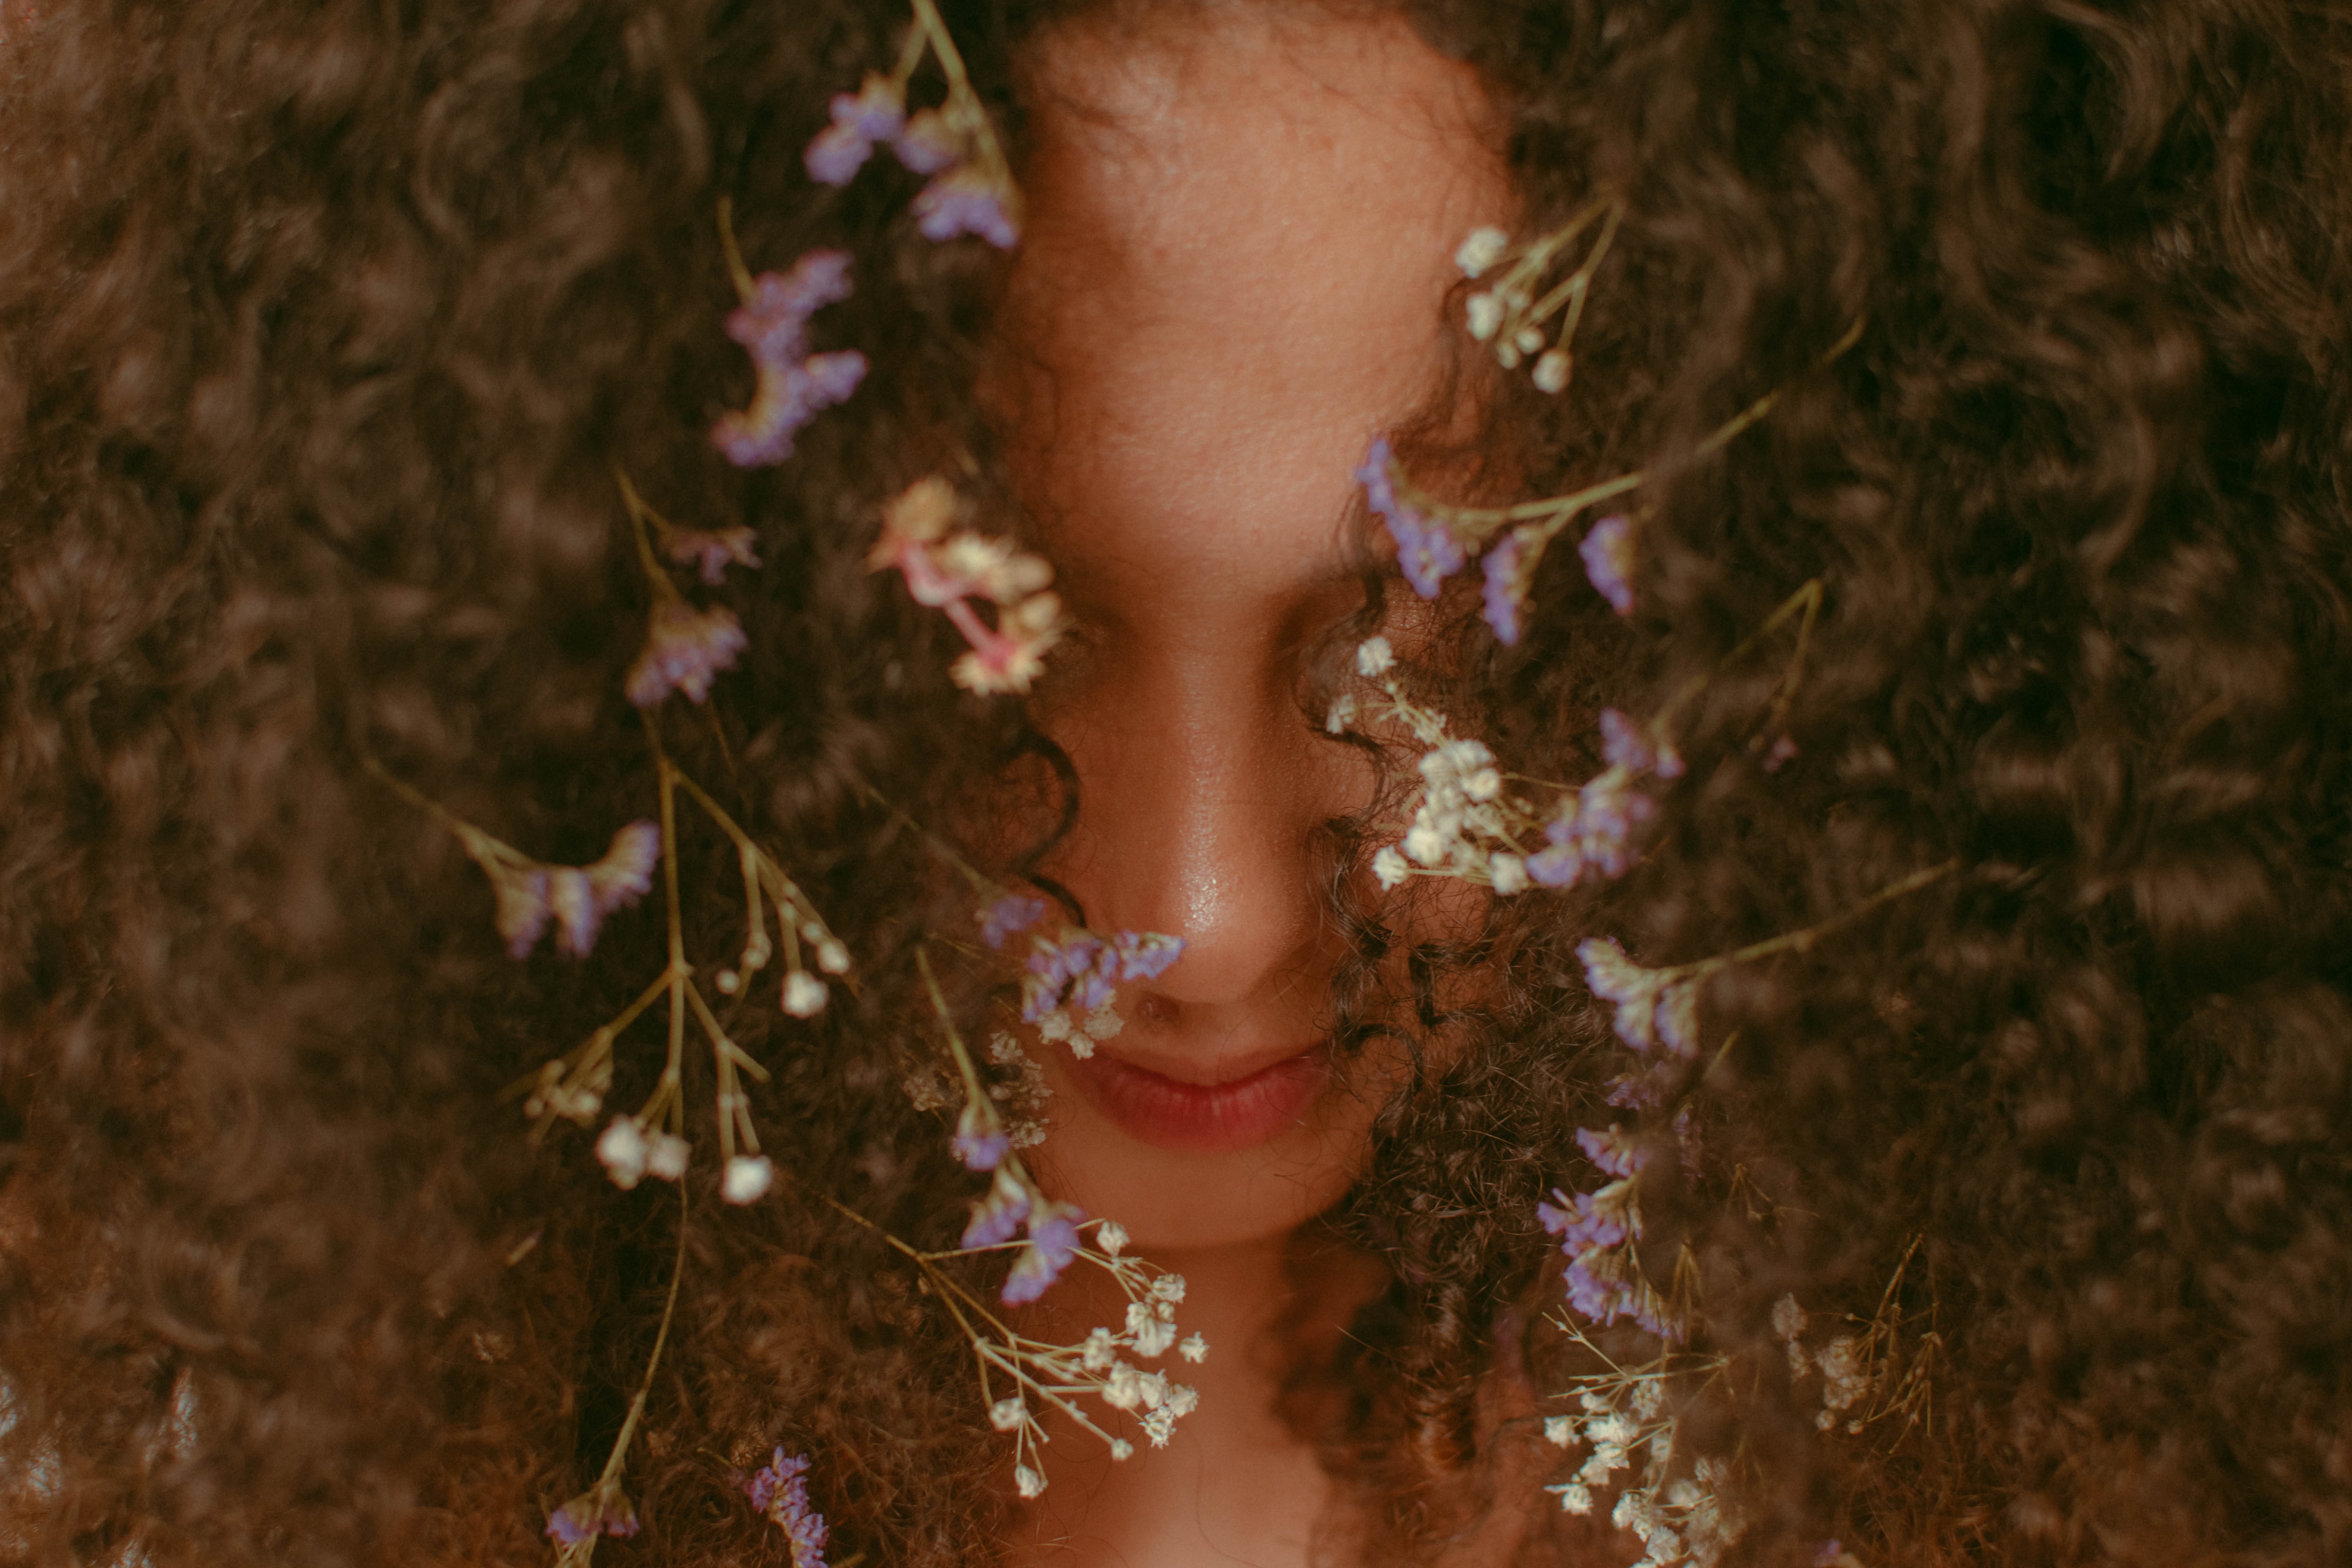 A woman with flowers in her hair. | Source: Pexels